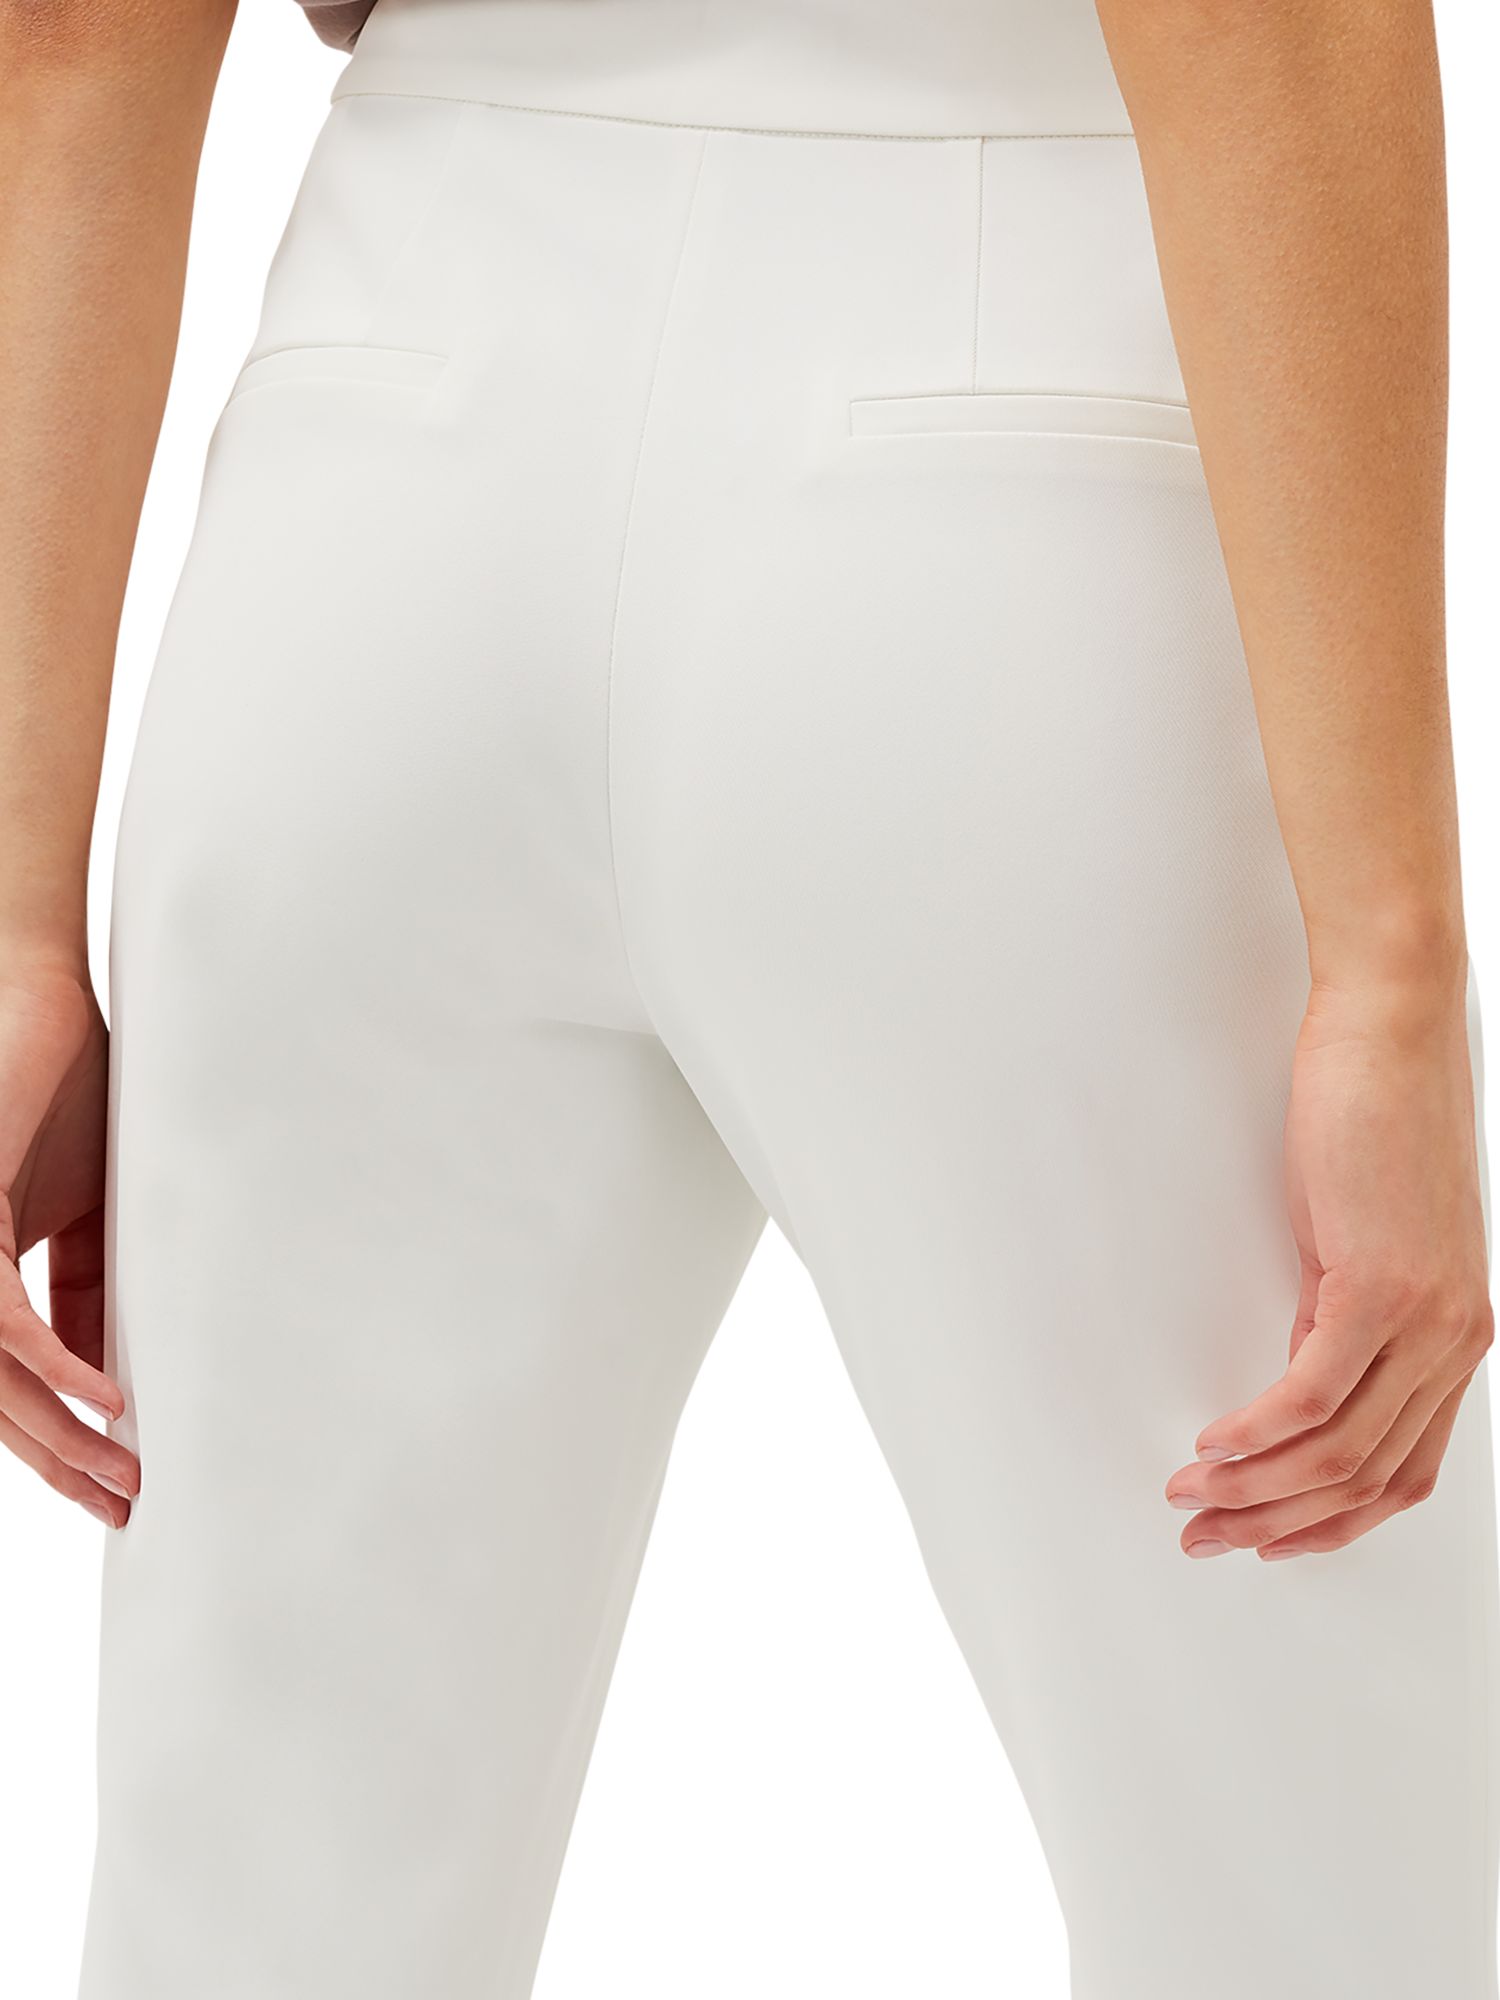 Buy Phase Eight Solange Wide Leg Suit Trousers, Ivory Online at johnlewis.com